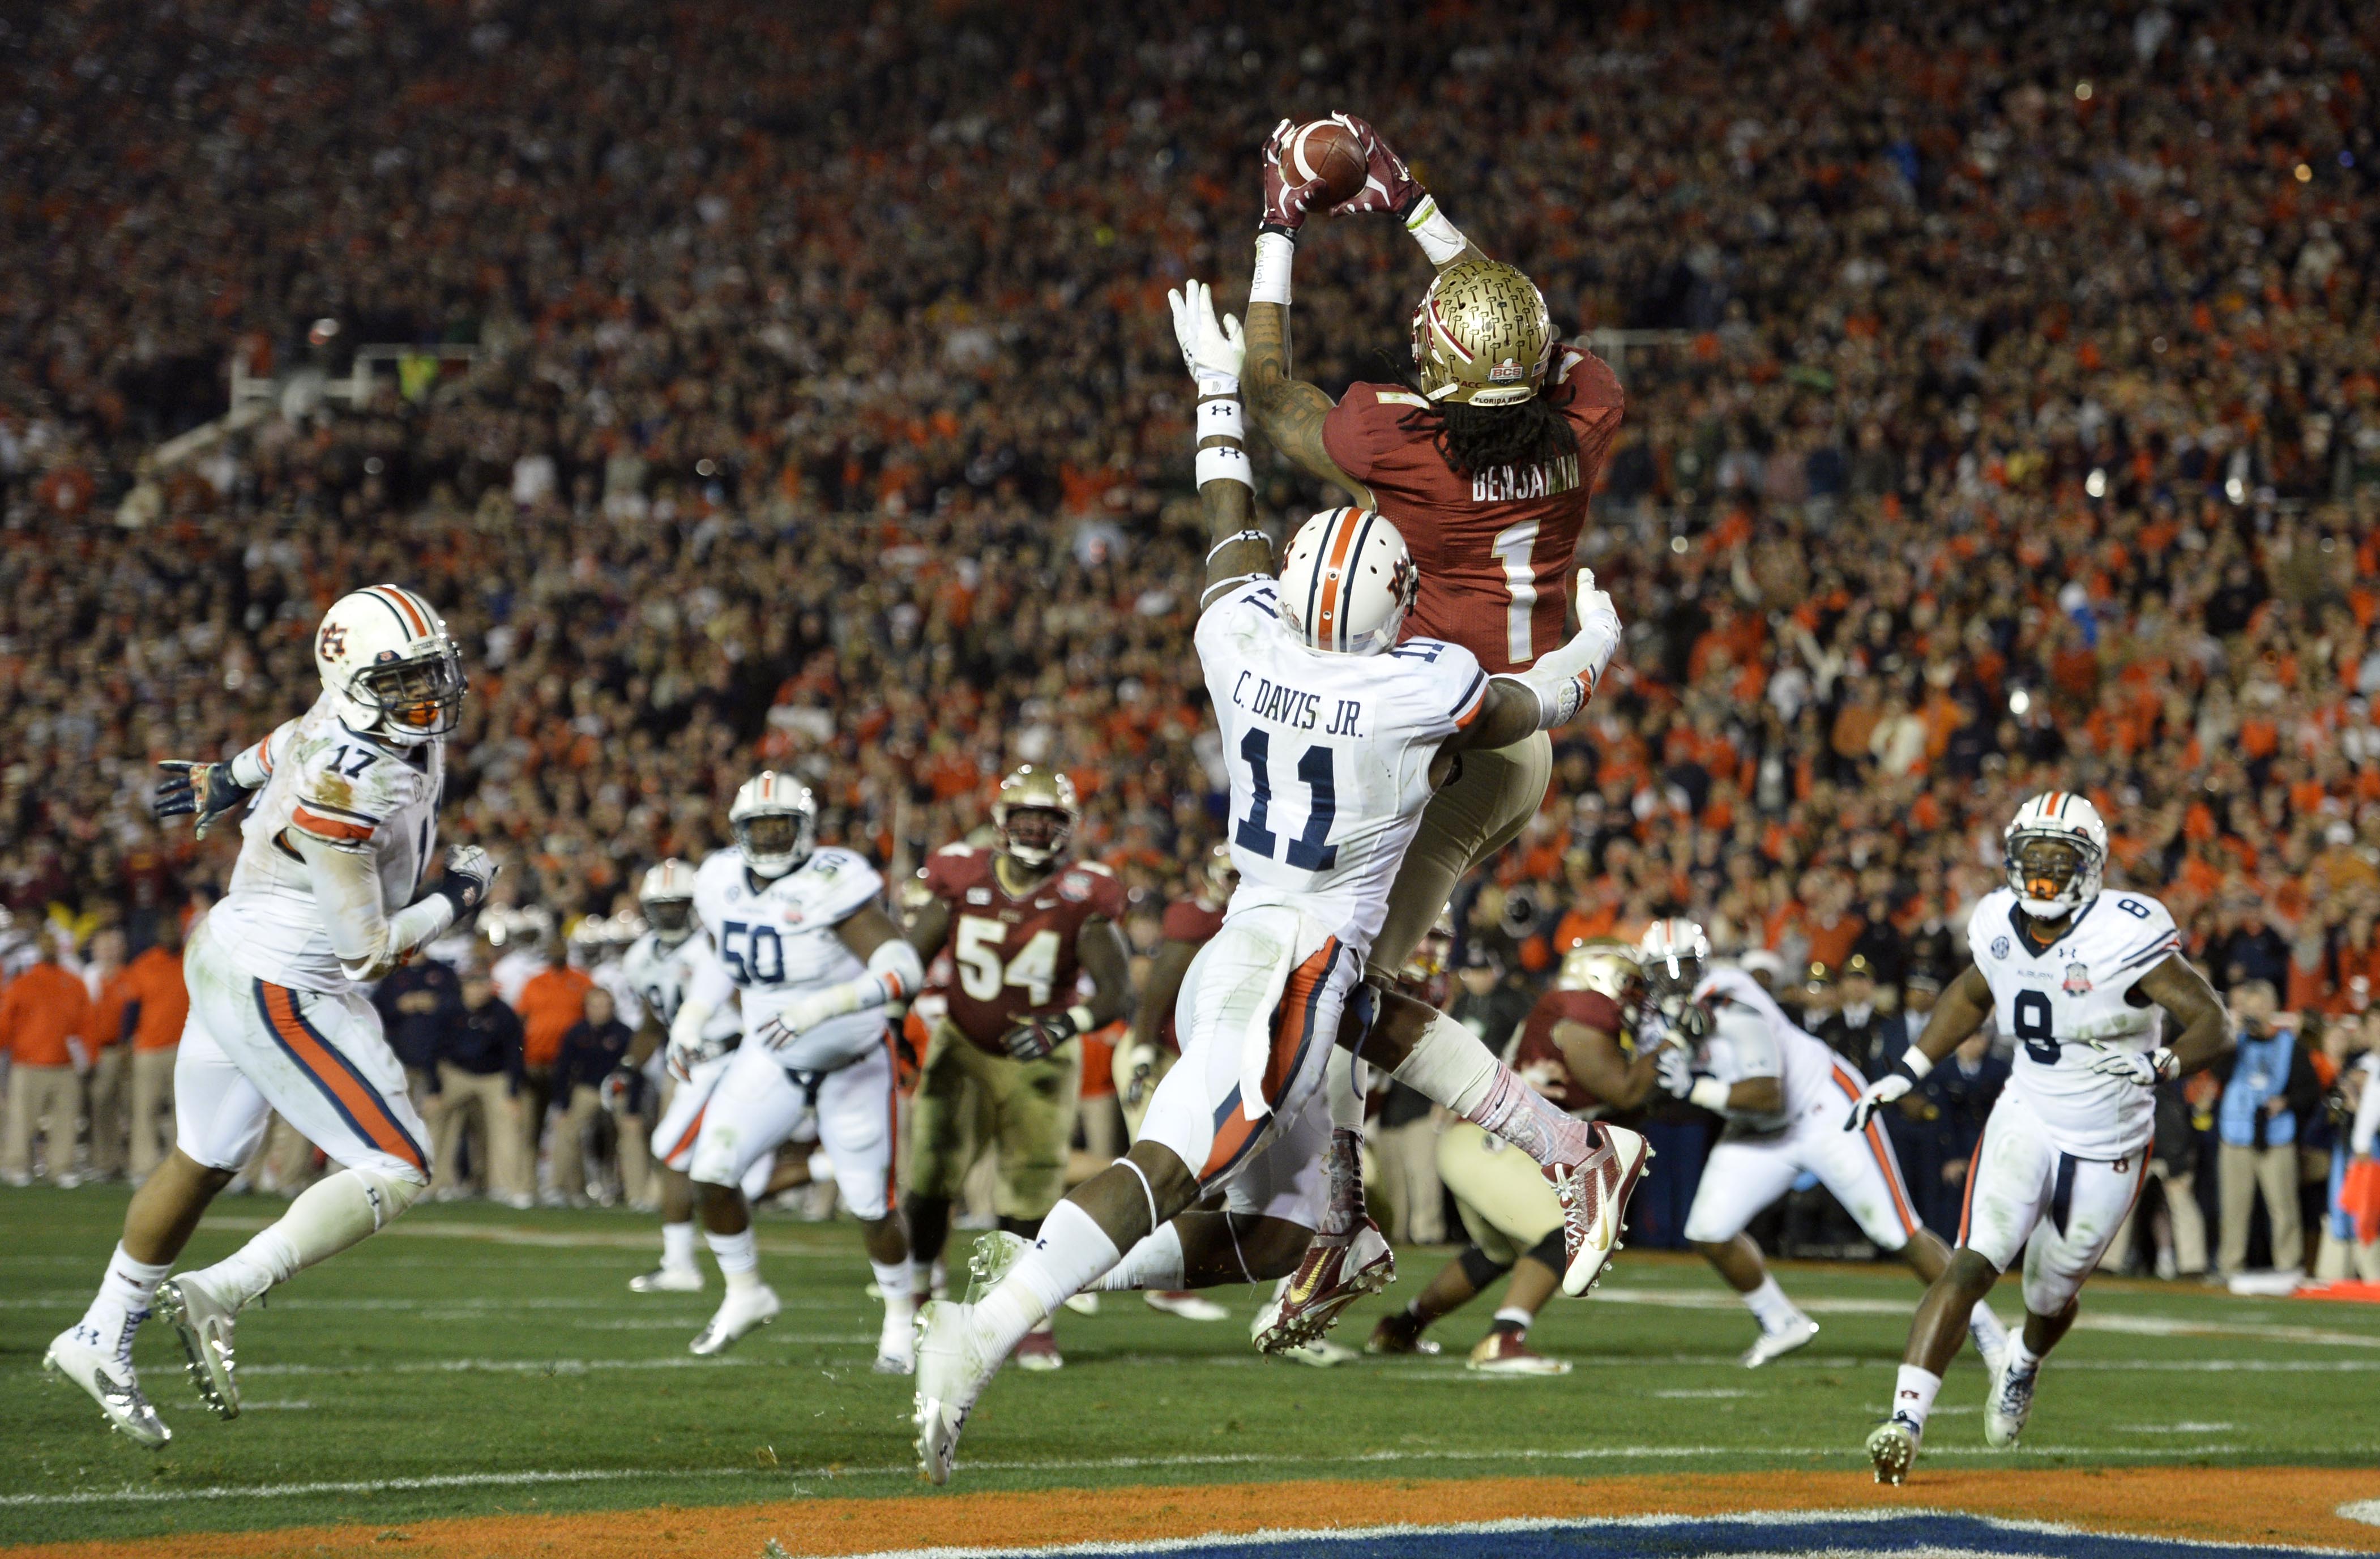 See 7 Photos Of Florida States Game Winning Touchdown For The Win 